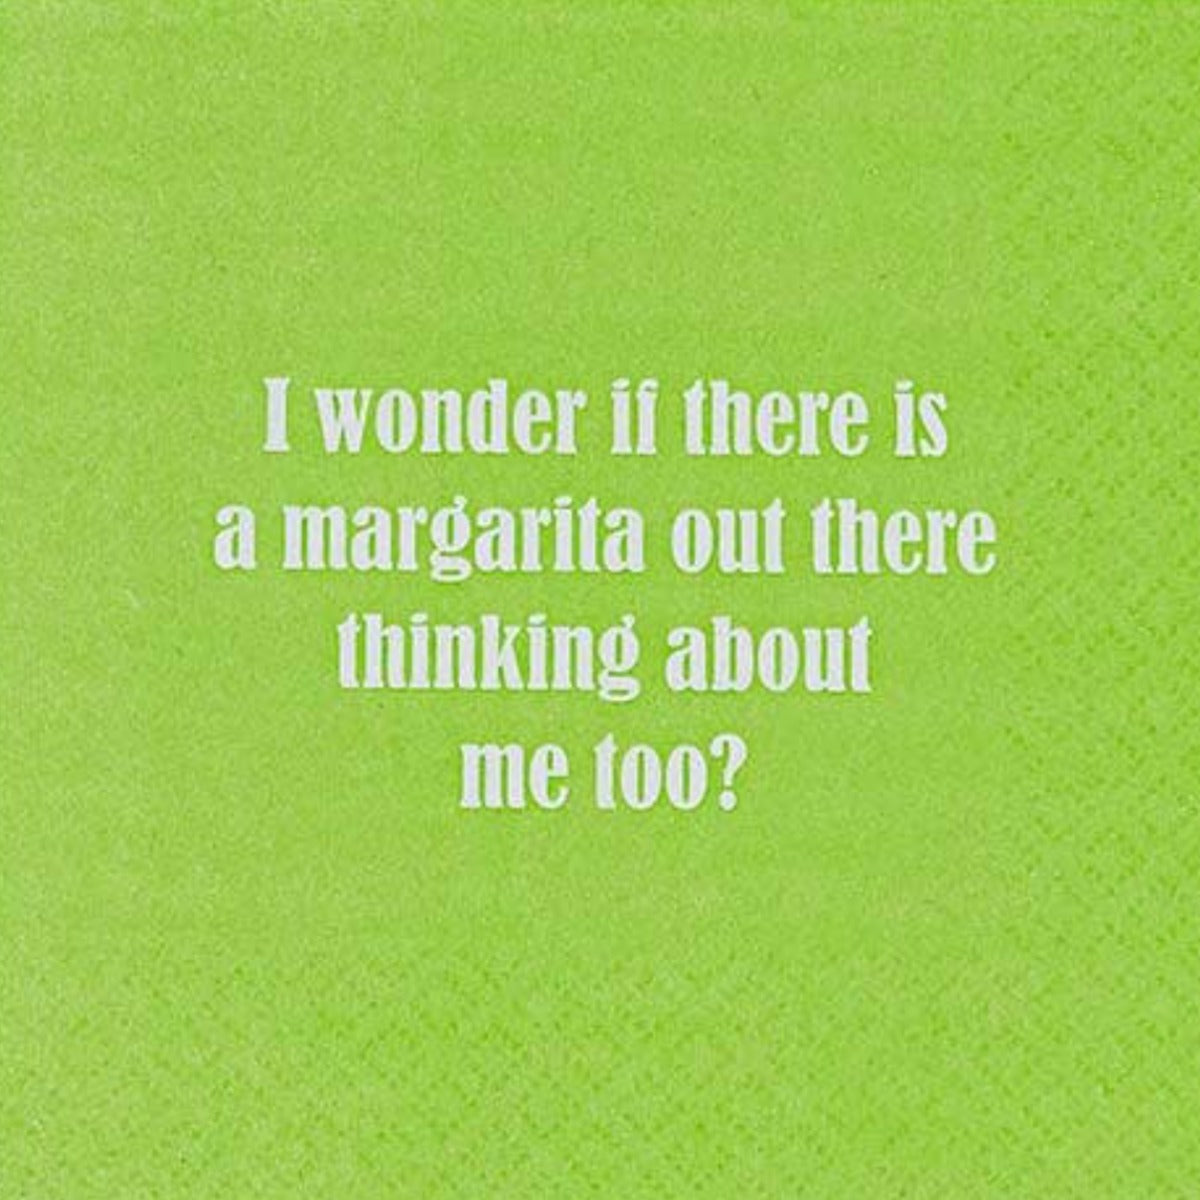 &quot; I Wonder If There Is A Margarita Out There Thinking About Me Too? Napkin Media 1 of 1